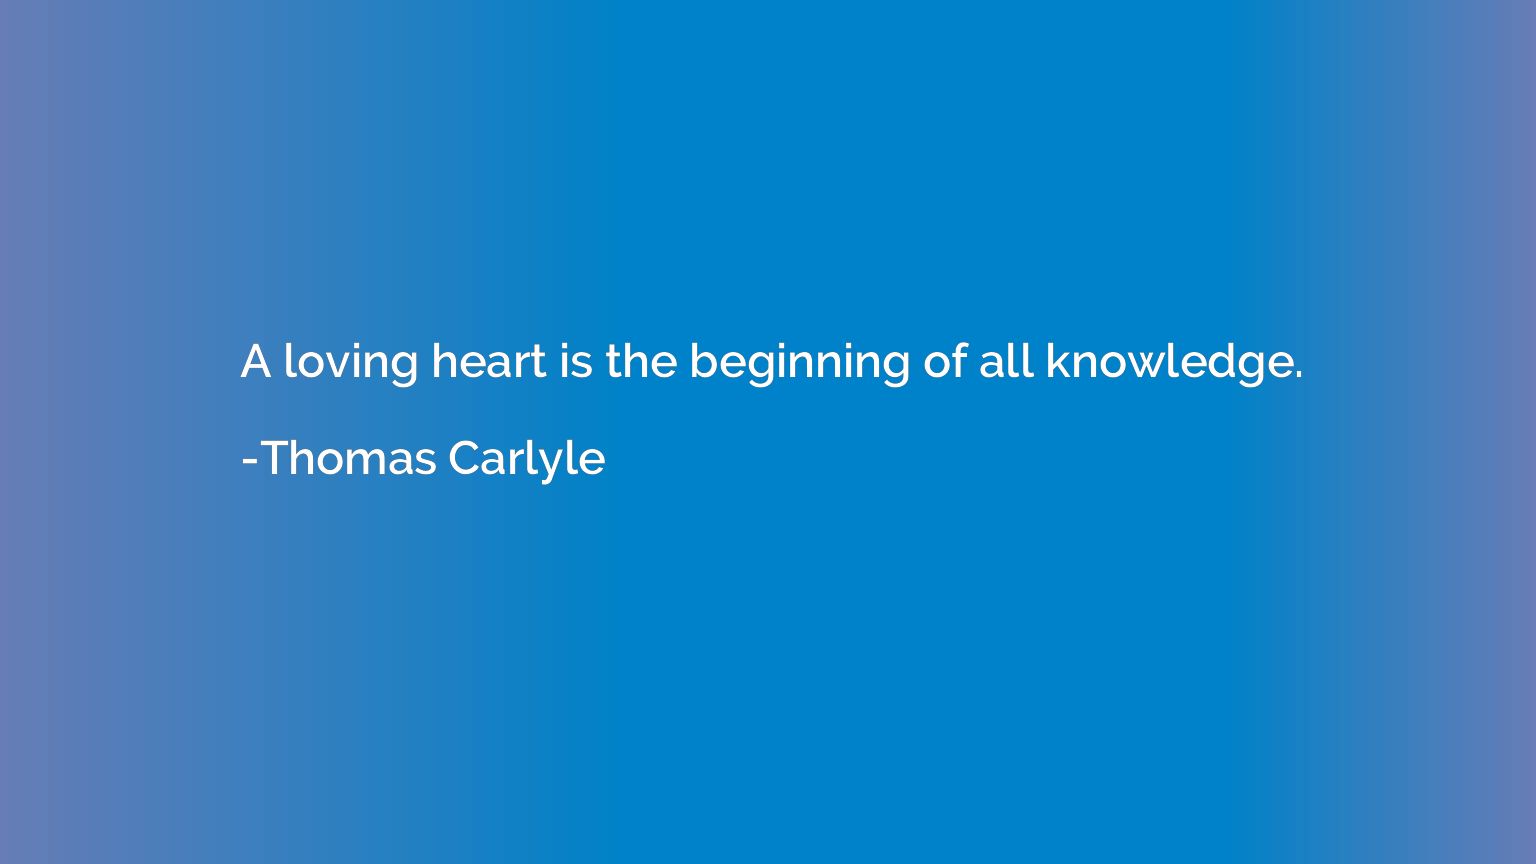 A loving heart is the beginning of all knowledge.